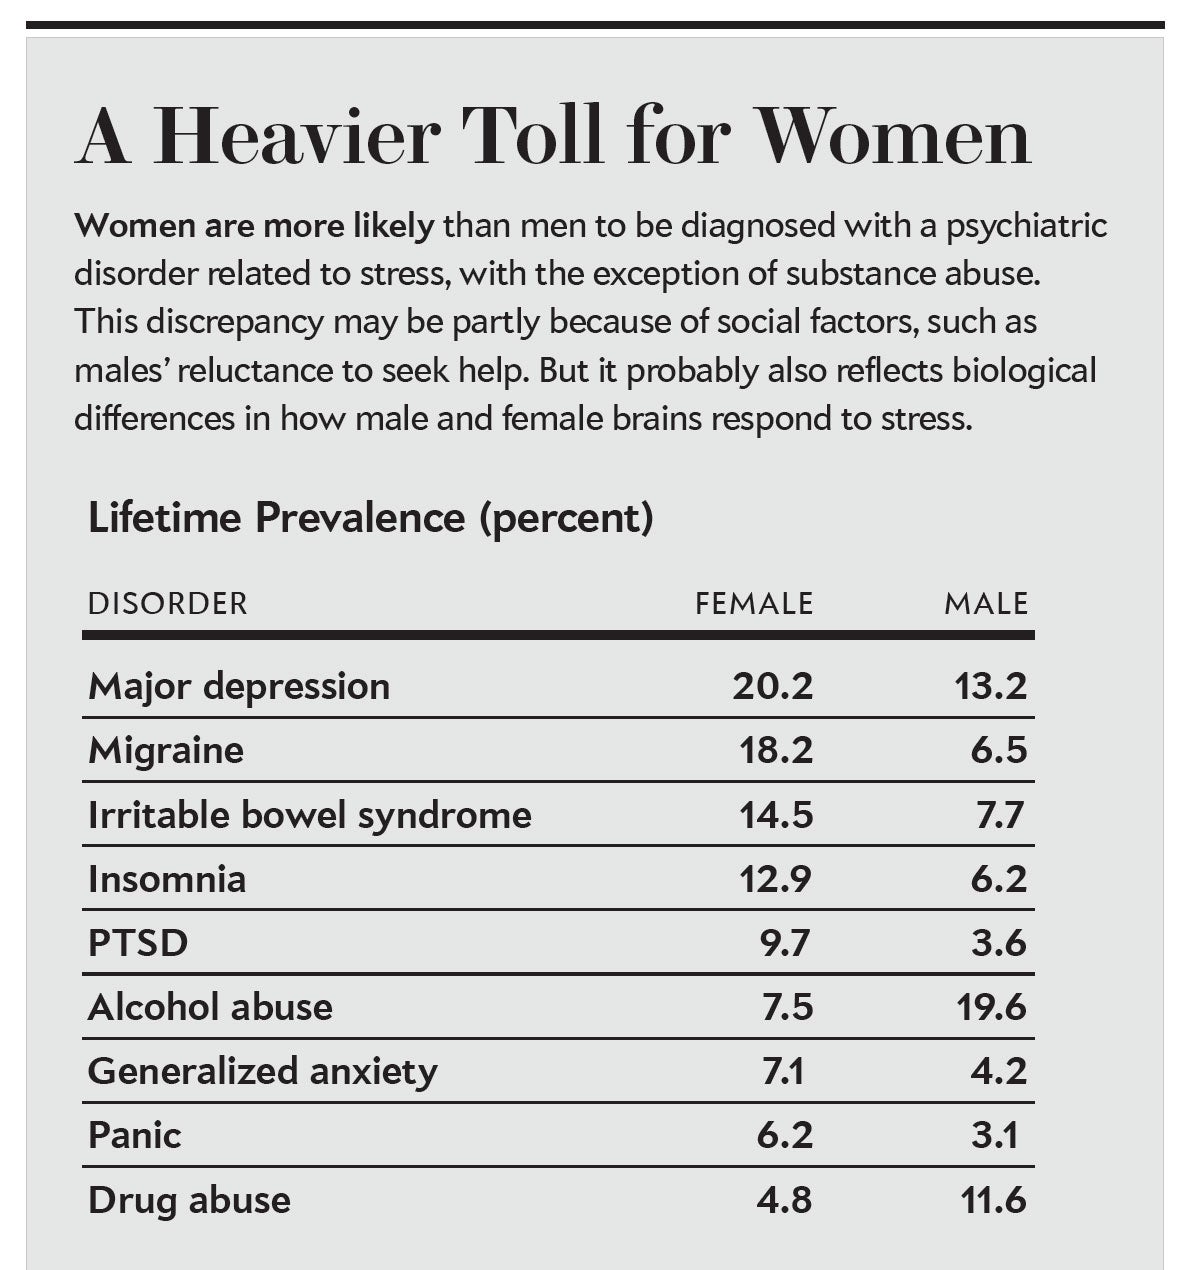 Sex differences in stress-related psychiatric disorders.